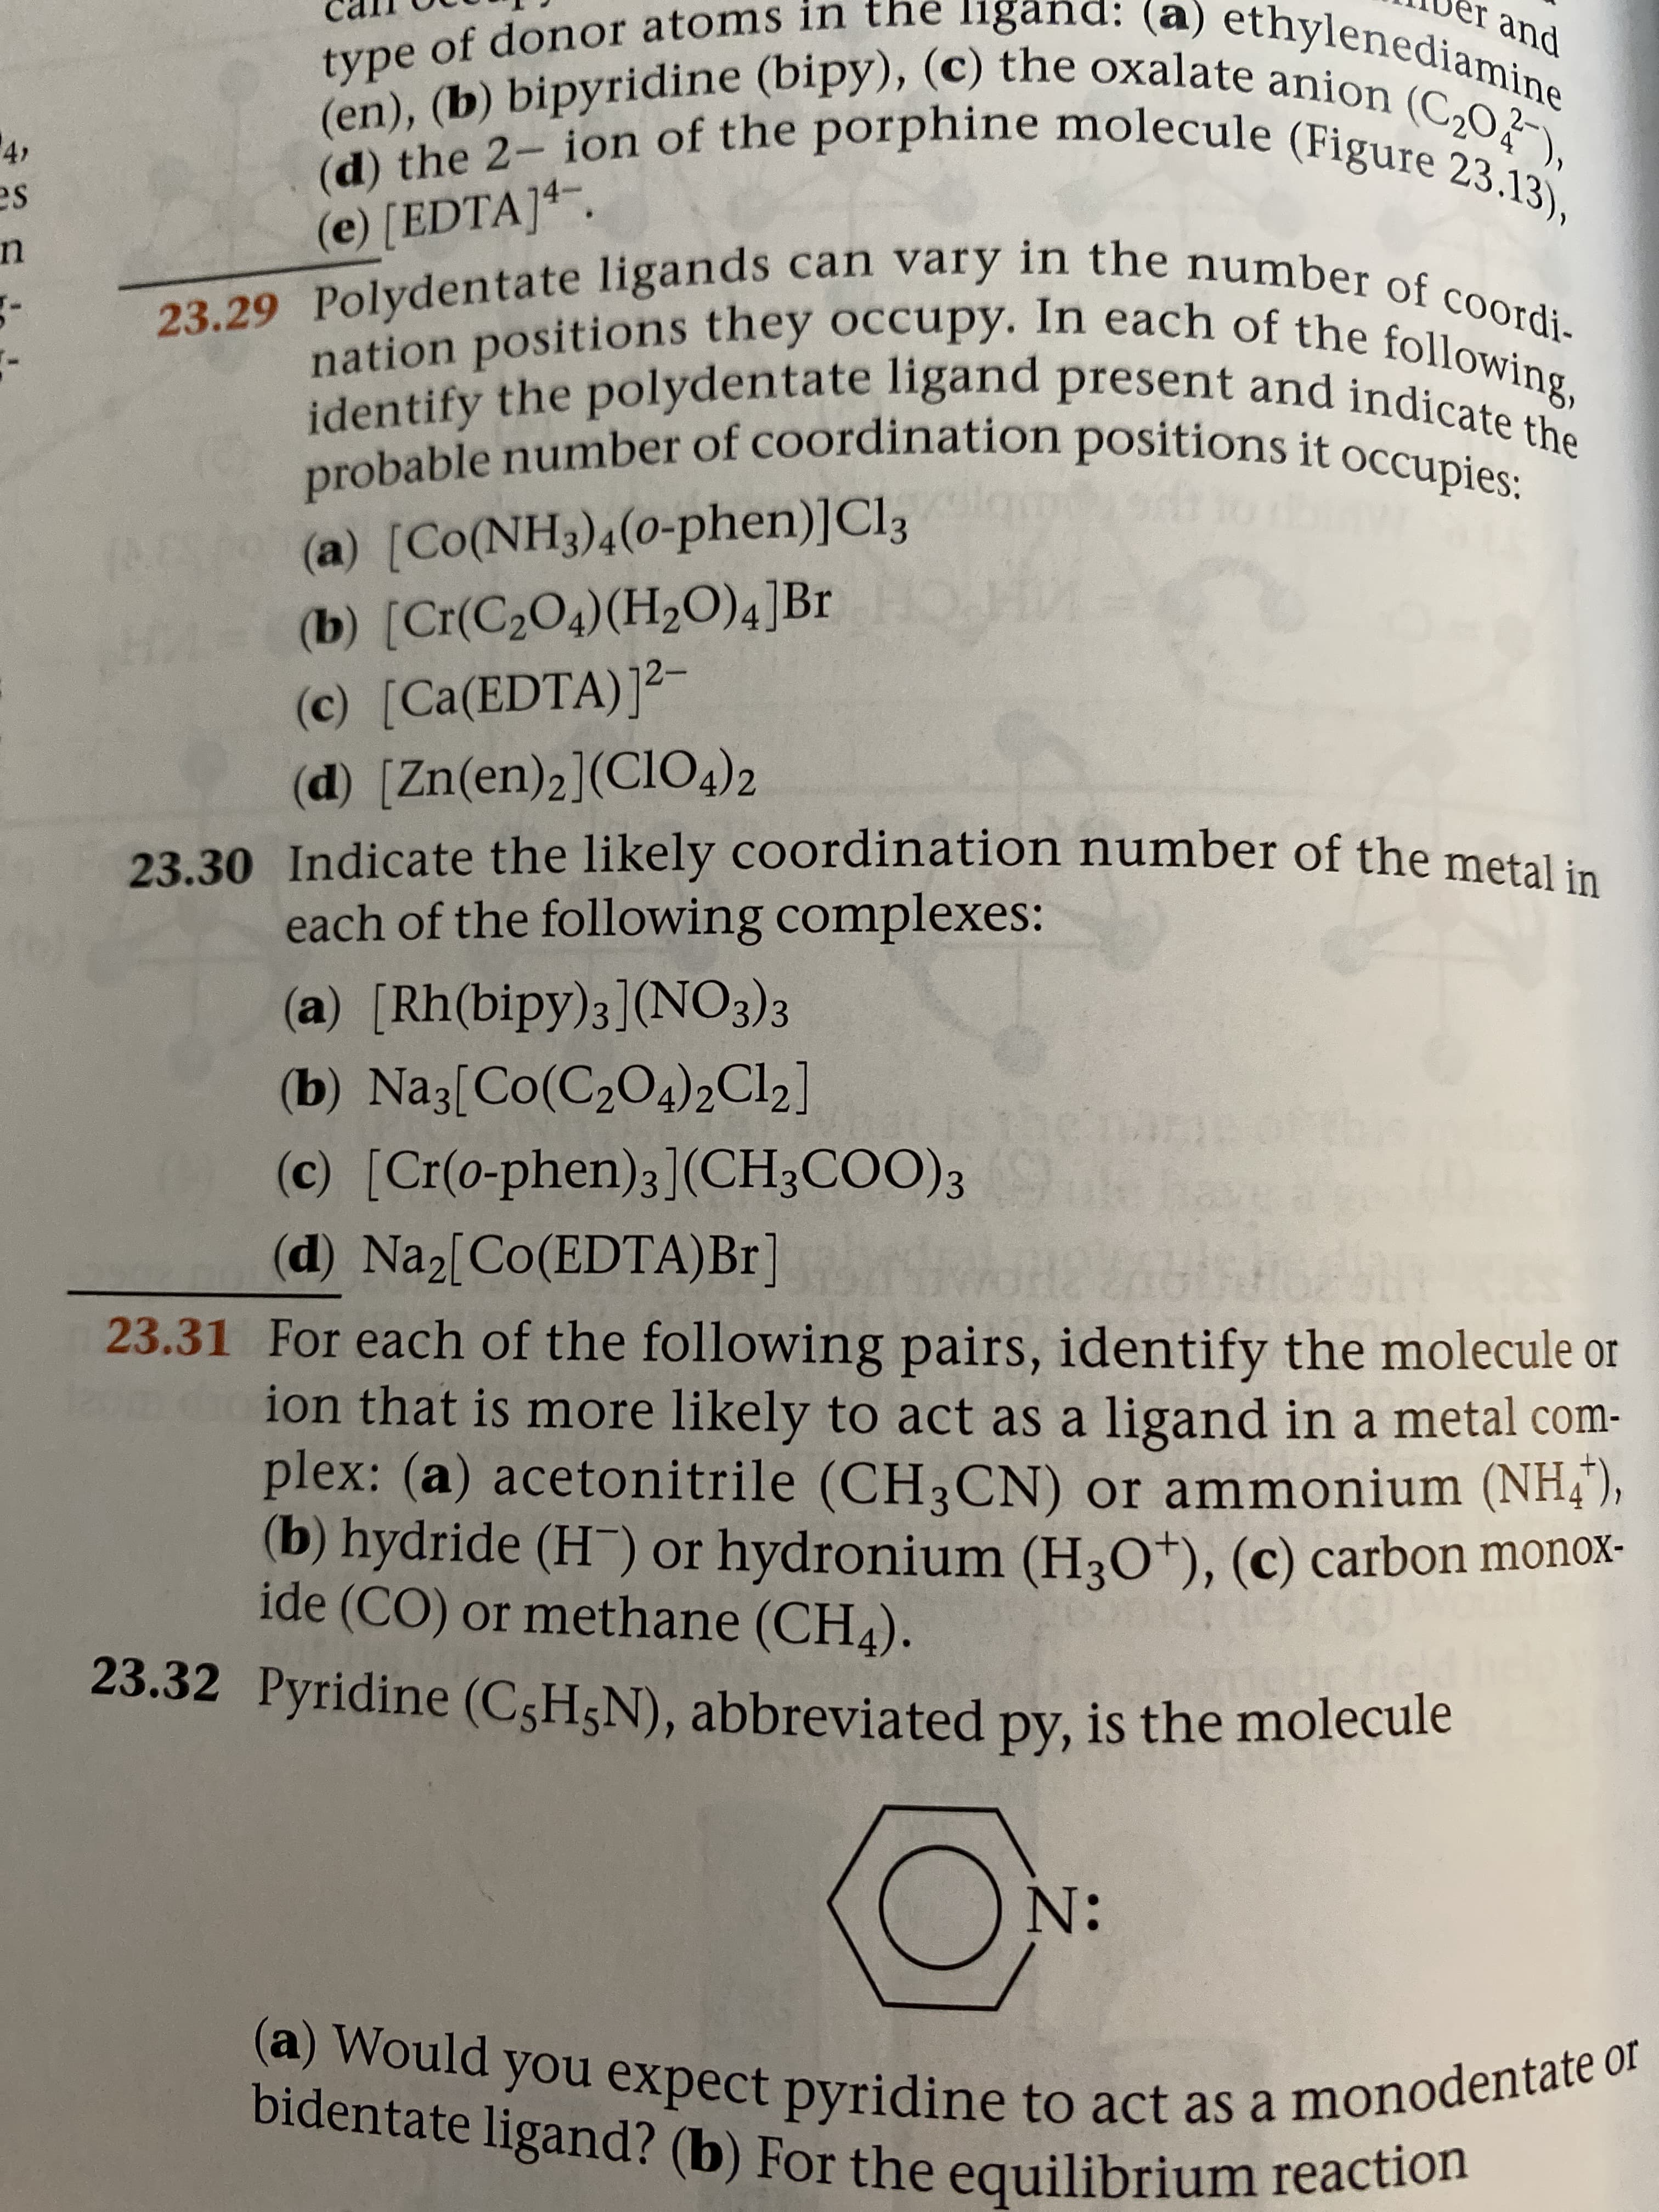 identify the polydentate ligand present and indicate the
wing,
probable number of coordination positions it occupies:
(a) [Co(NH3)4(0-phen)]Cl3
(b) [Cr(C2O4)(H2O)4]Br
(c) [Ca(EDTA)]²-
(d) [Zn(en)2](CIO4)2
